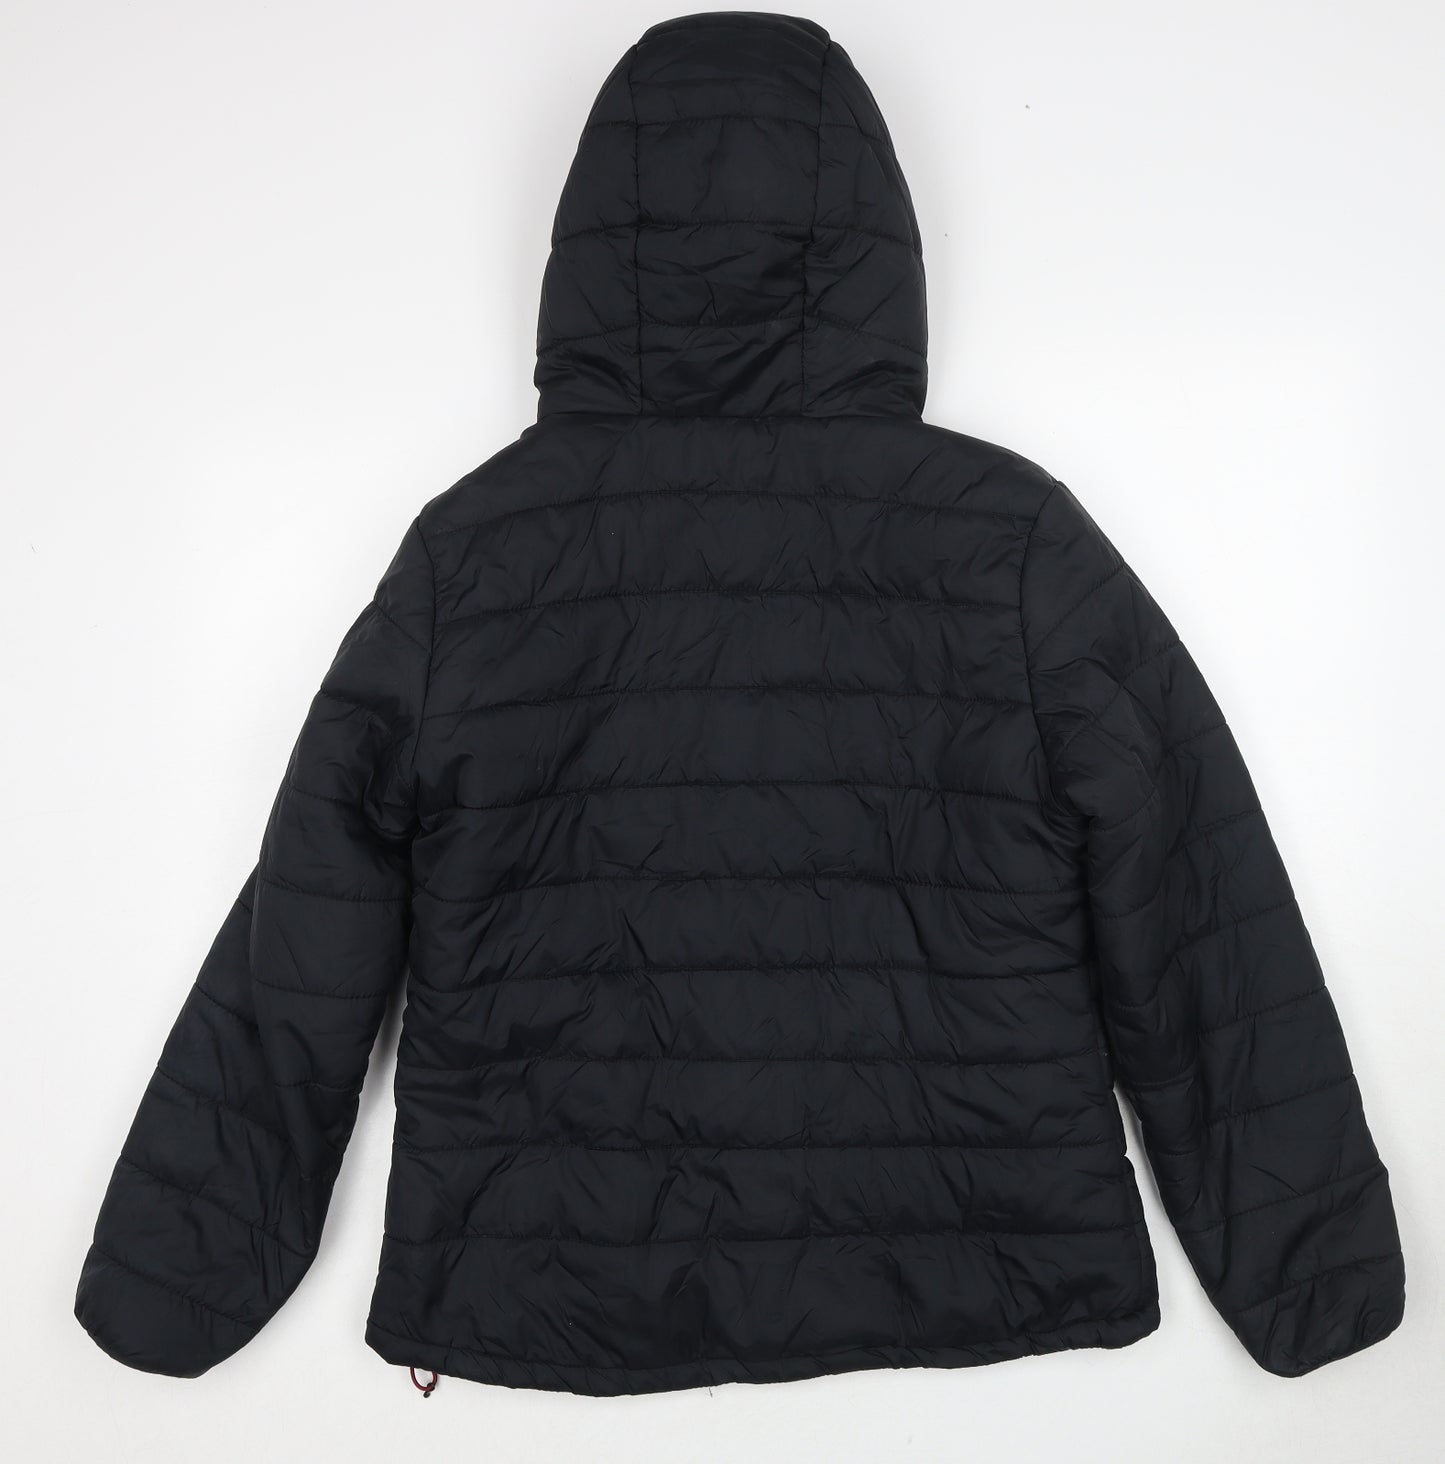 Freedom Trail Womens Black Quilted Jacket Size 14 Zip